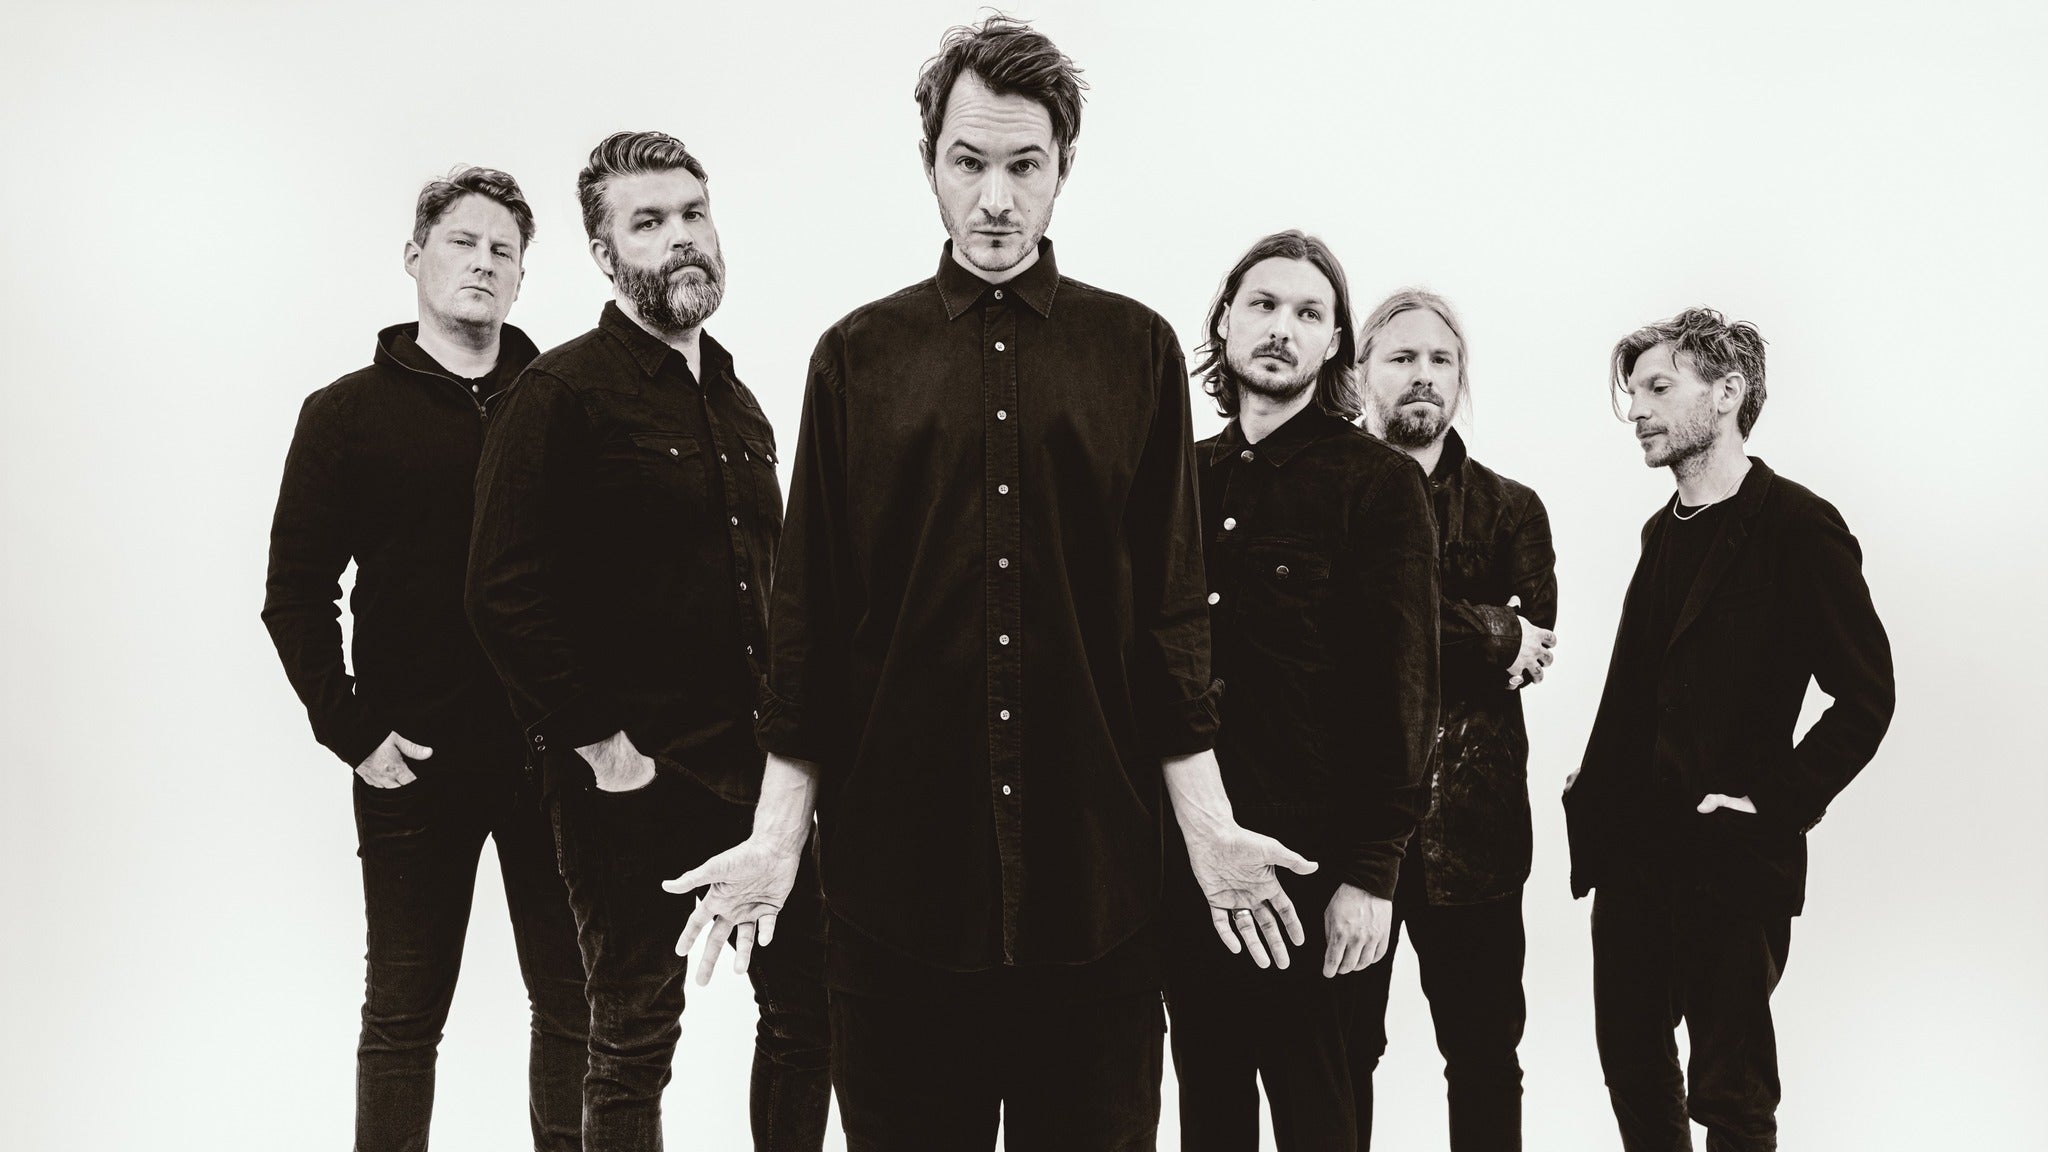 Image used with permission from Ticketmaster | Editors tickets